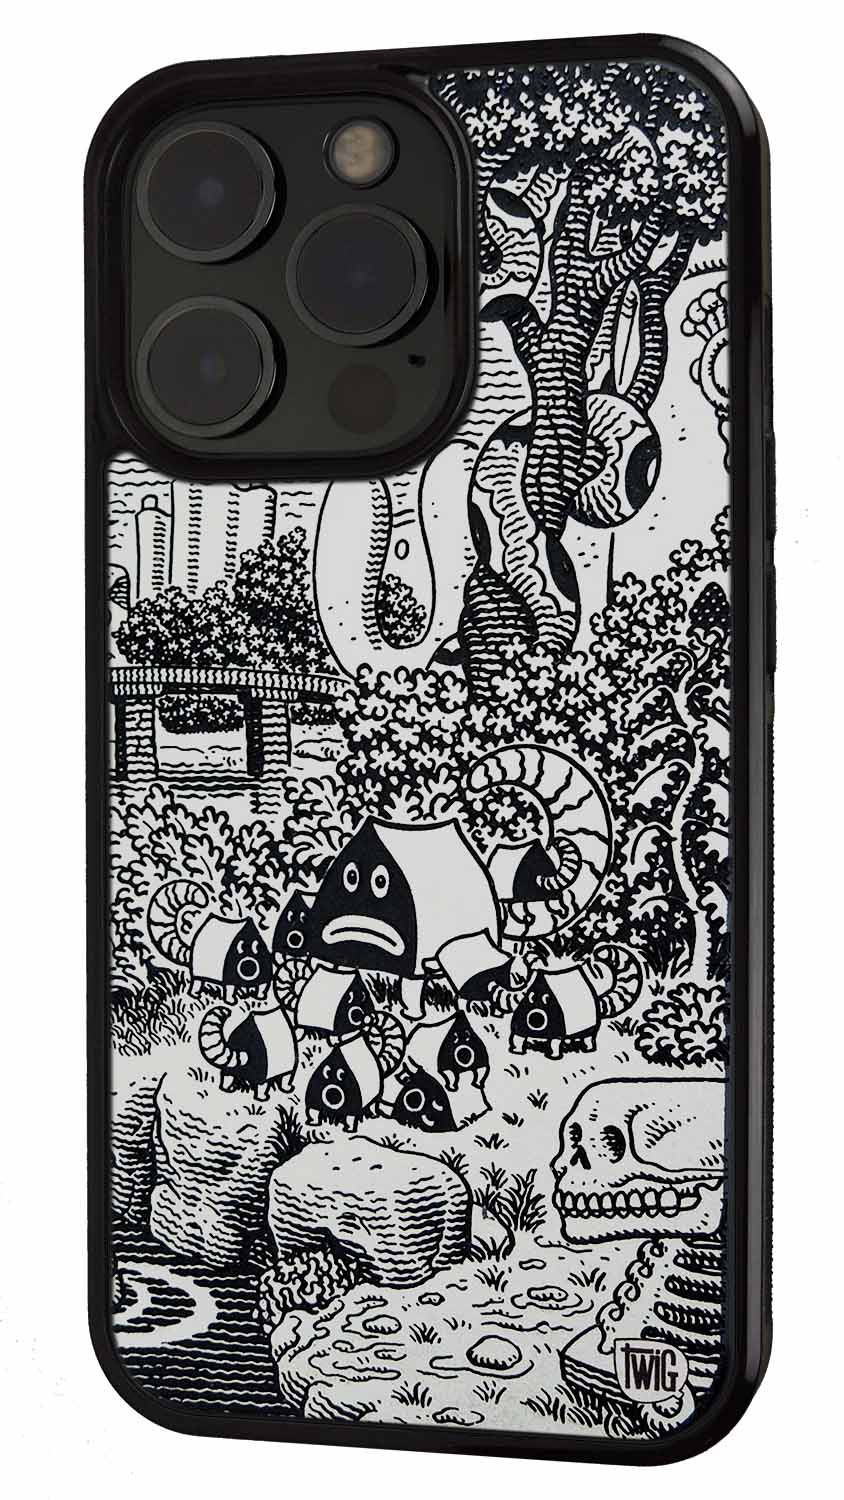 Frank in the Tempest: Pupshaw - Color Paper iPhone Case, iPhone Case - Twig Case Co.